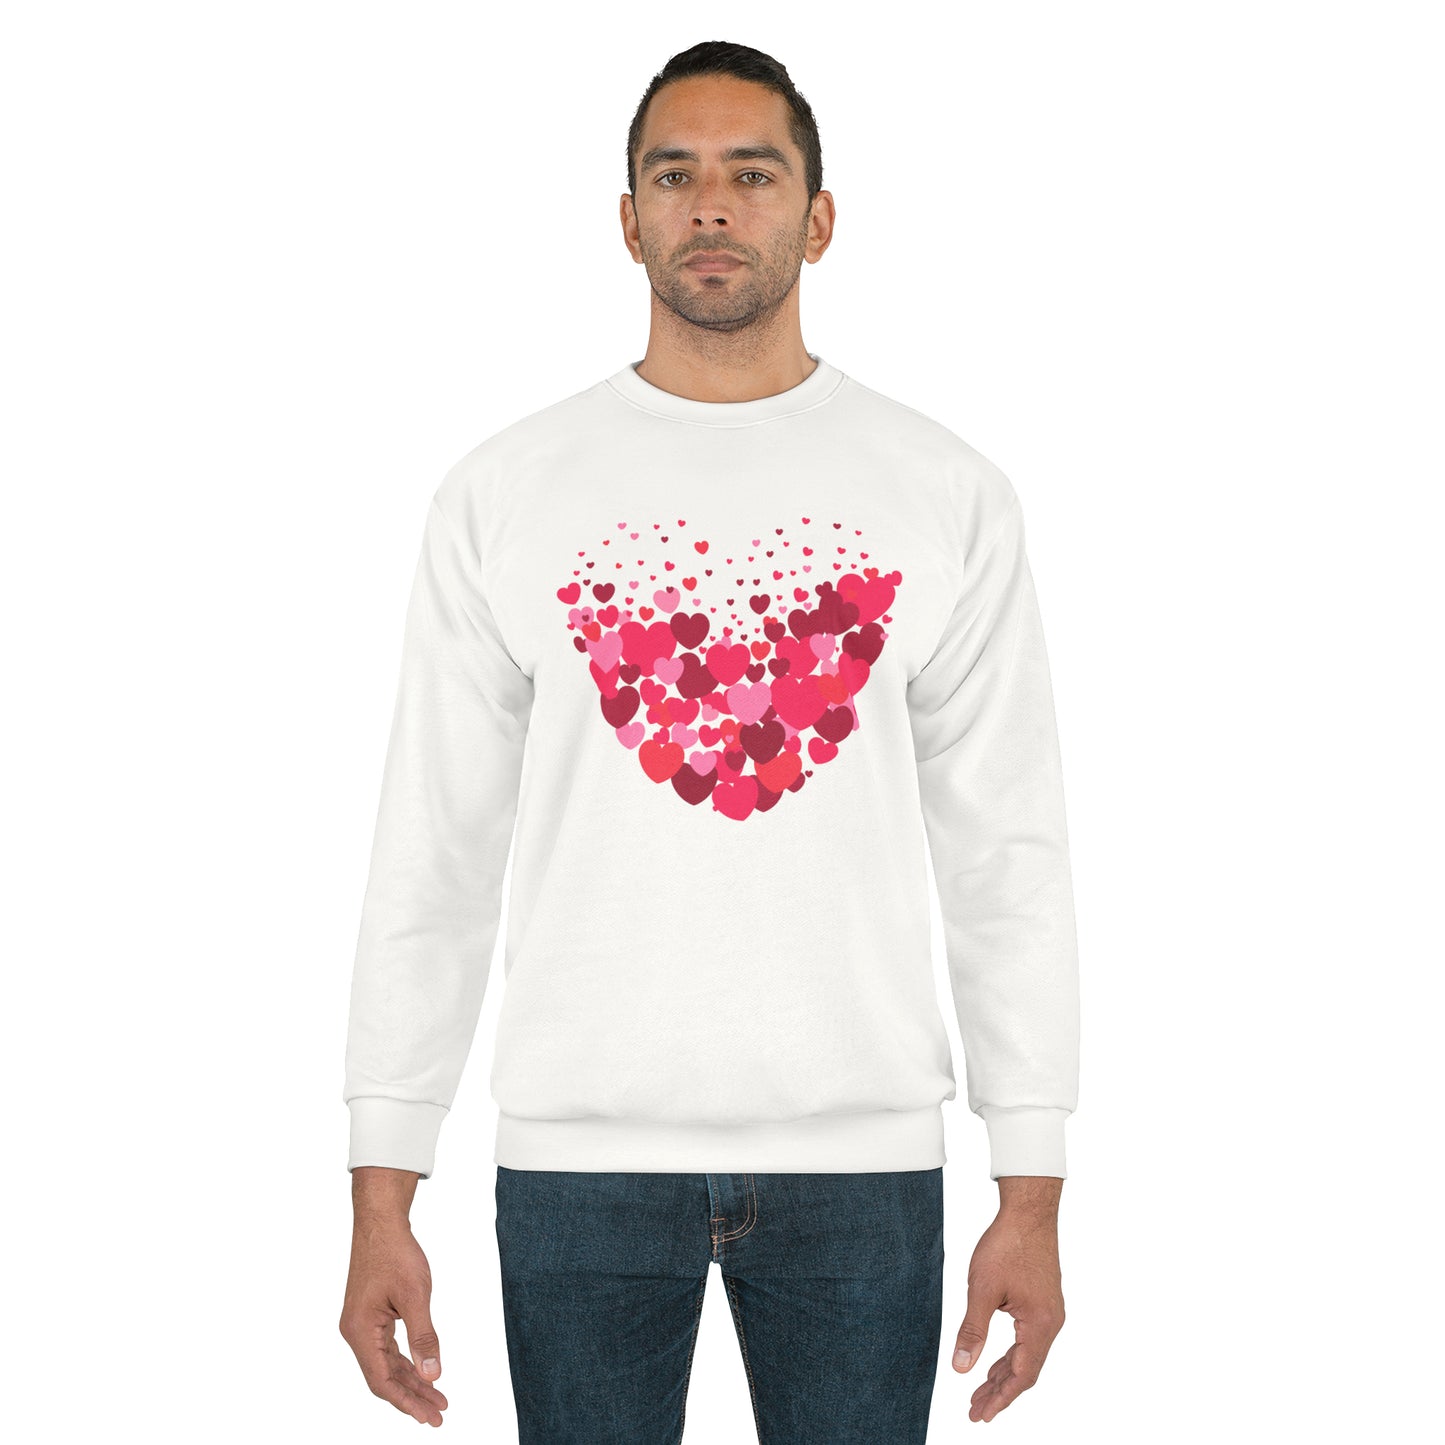 Full of hearts sweatshirt, great gift for him or her. Great Valentines Day gift